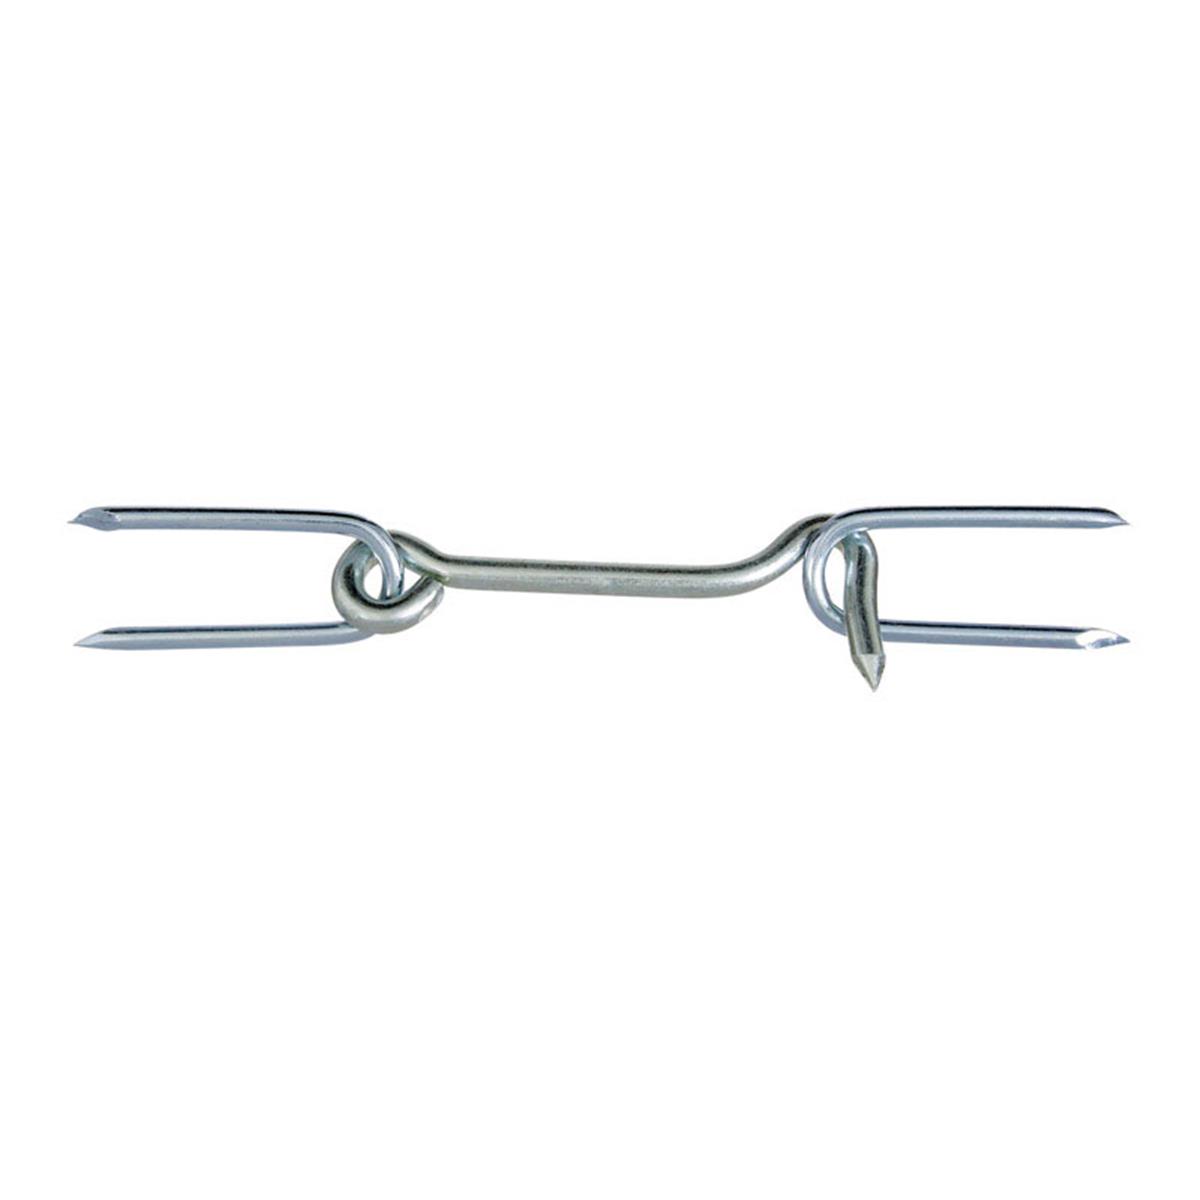 5706791 4 In. Gate Steel Hook With Staples, Zinc Plated